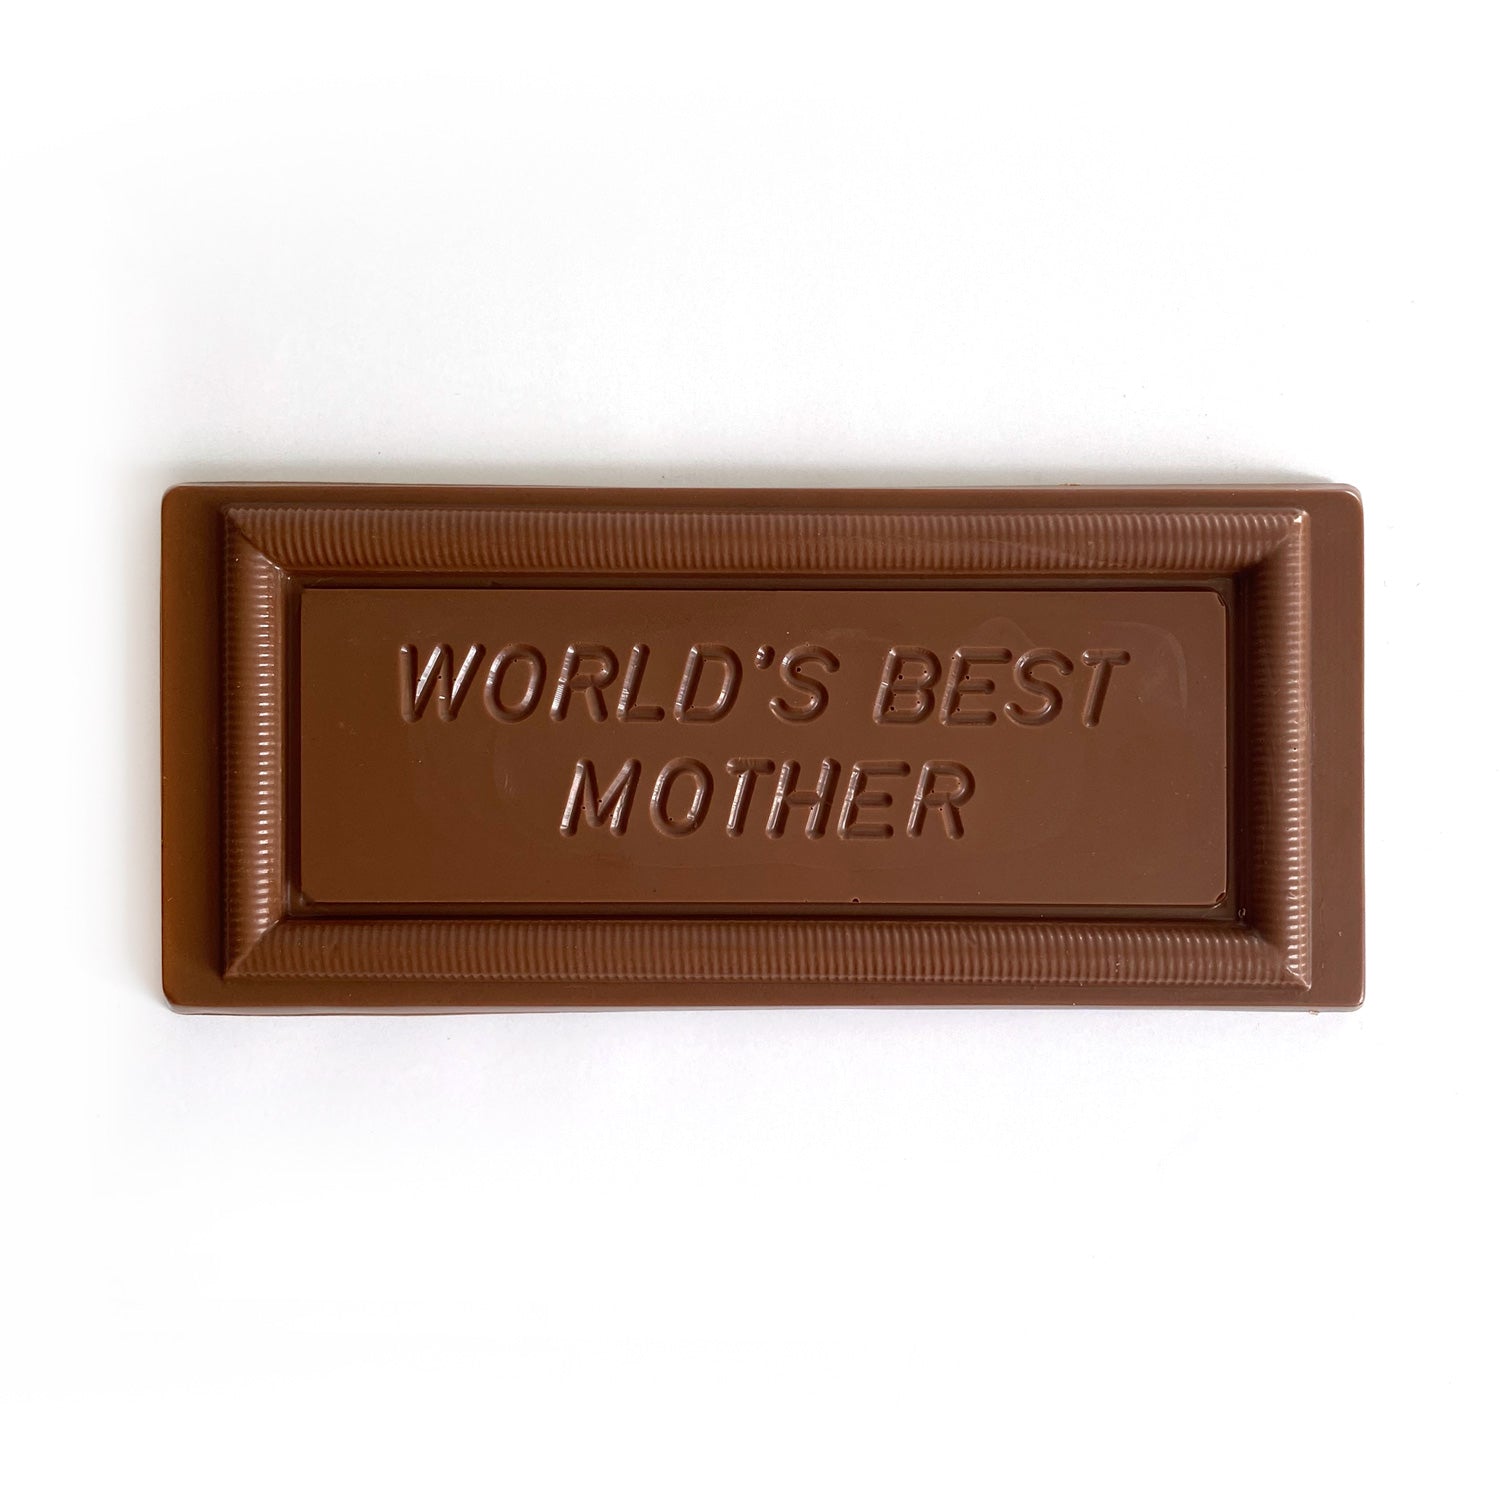 Milk chocolate bar with words 'world's best mother